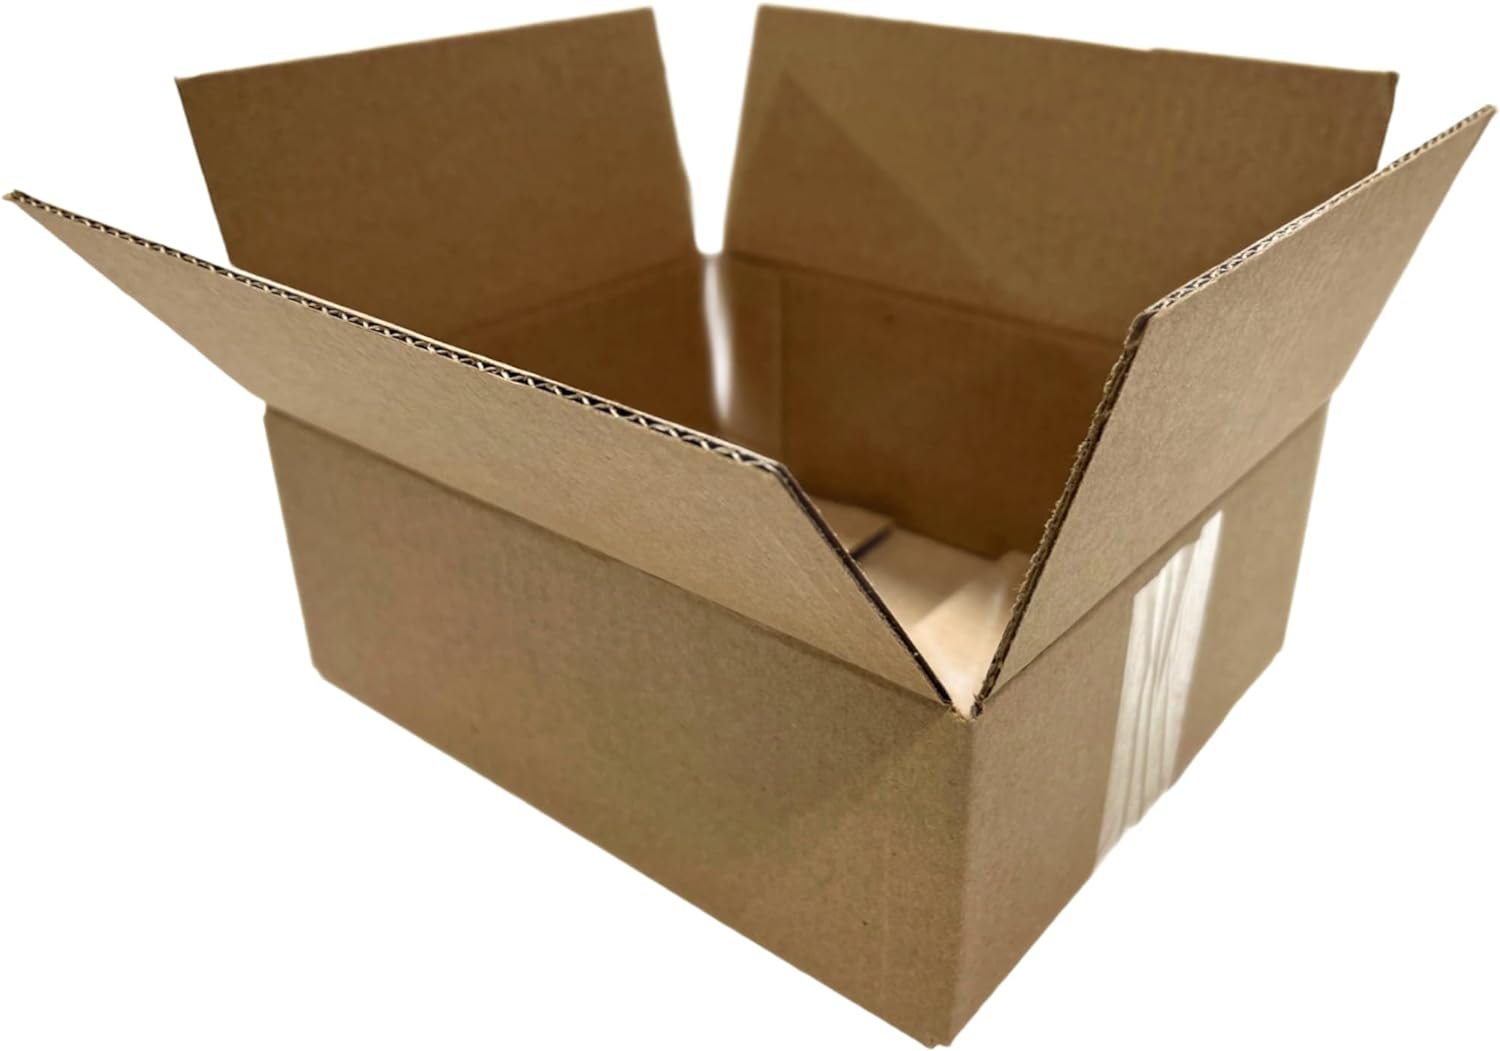 1000 6x4x4 Cardboard Paper Boxes Mailing Packing Shipping Box Corrugated Carton